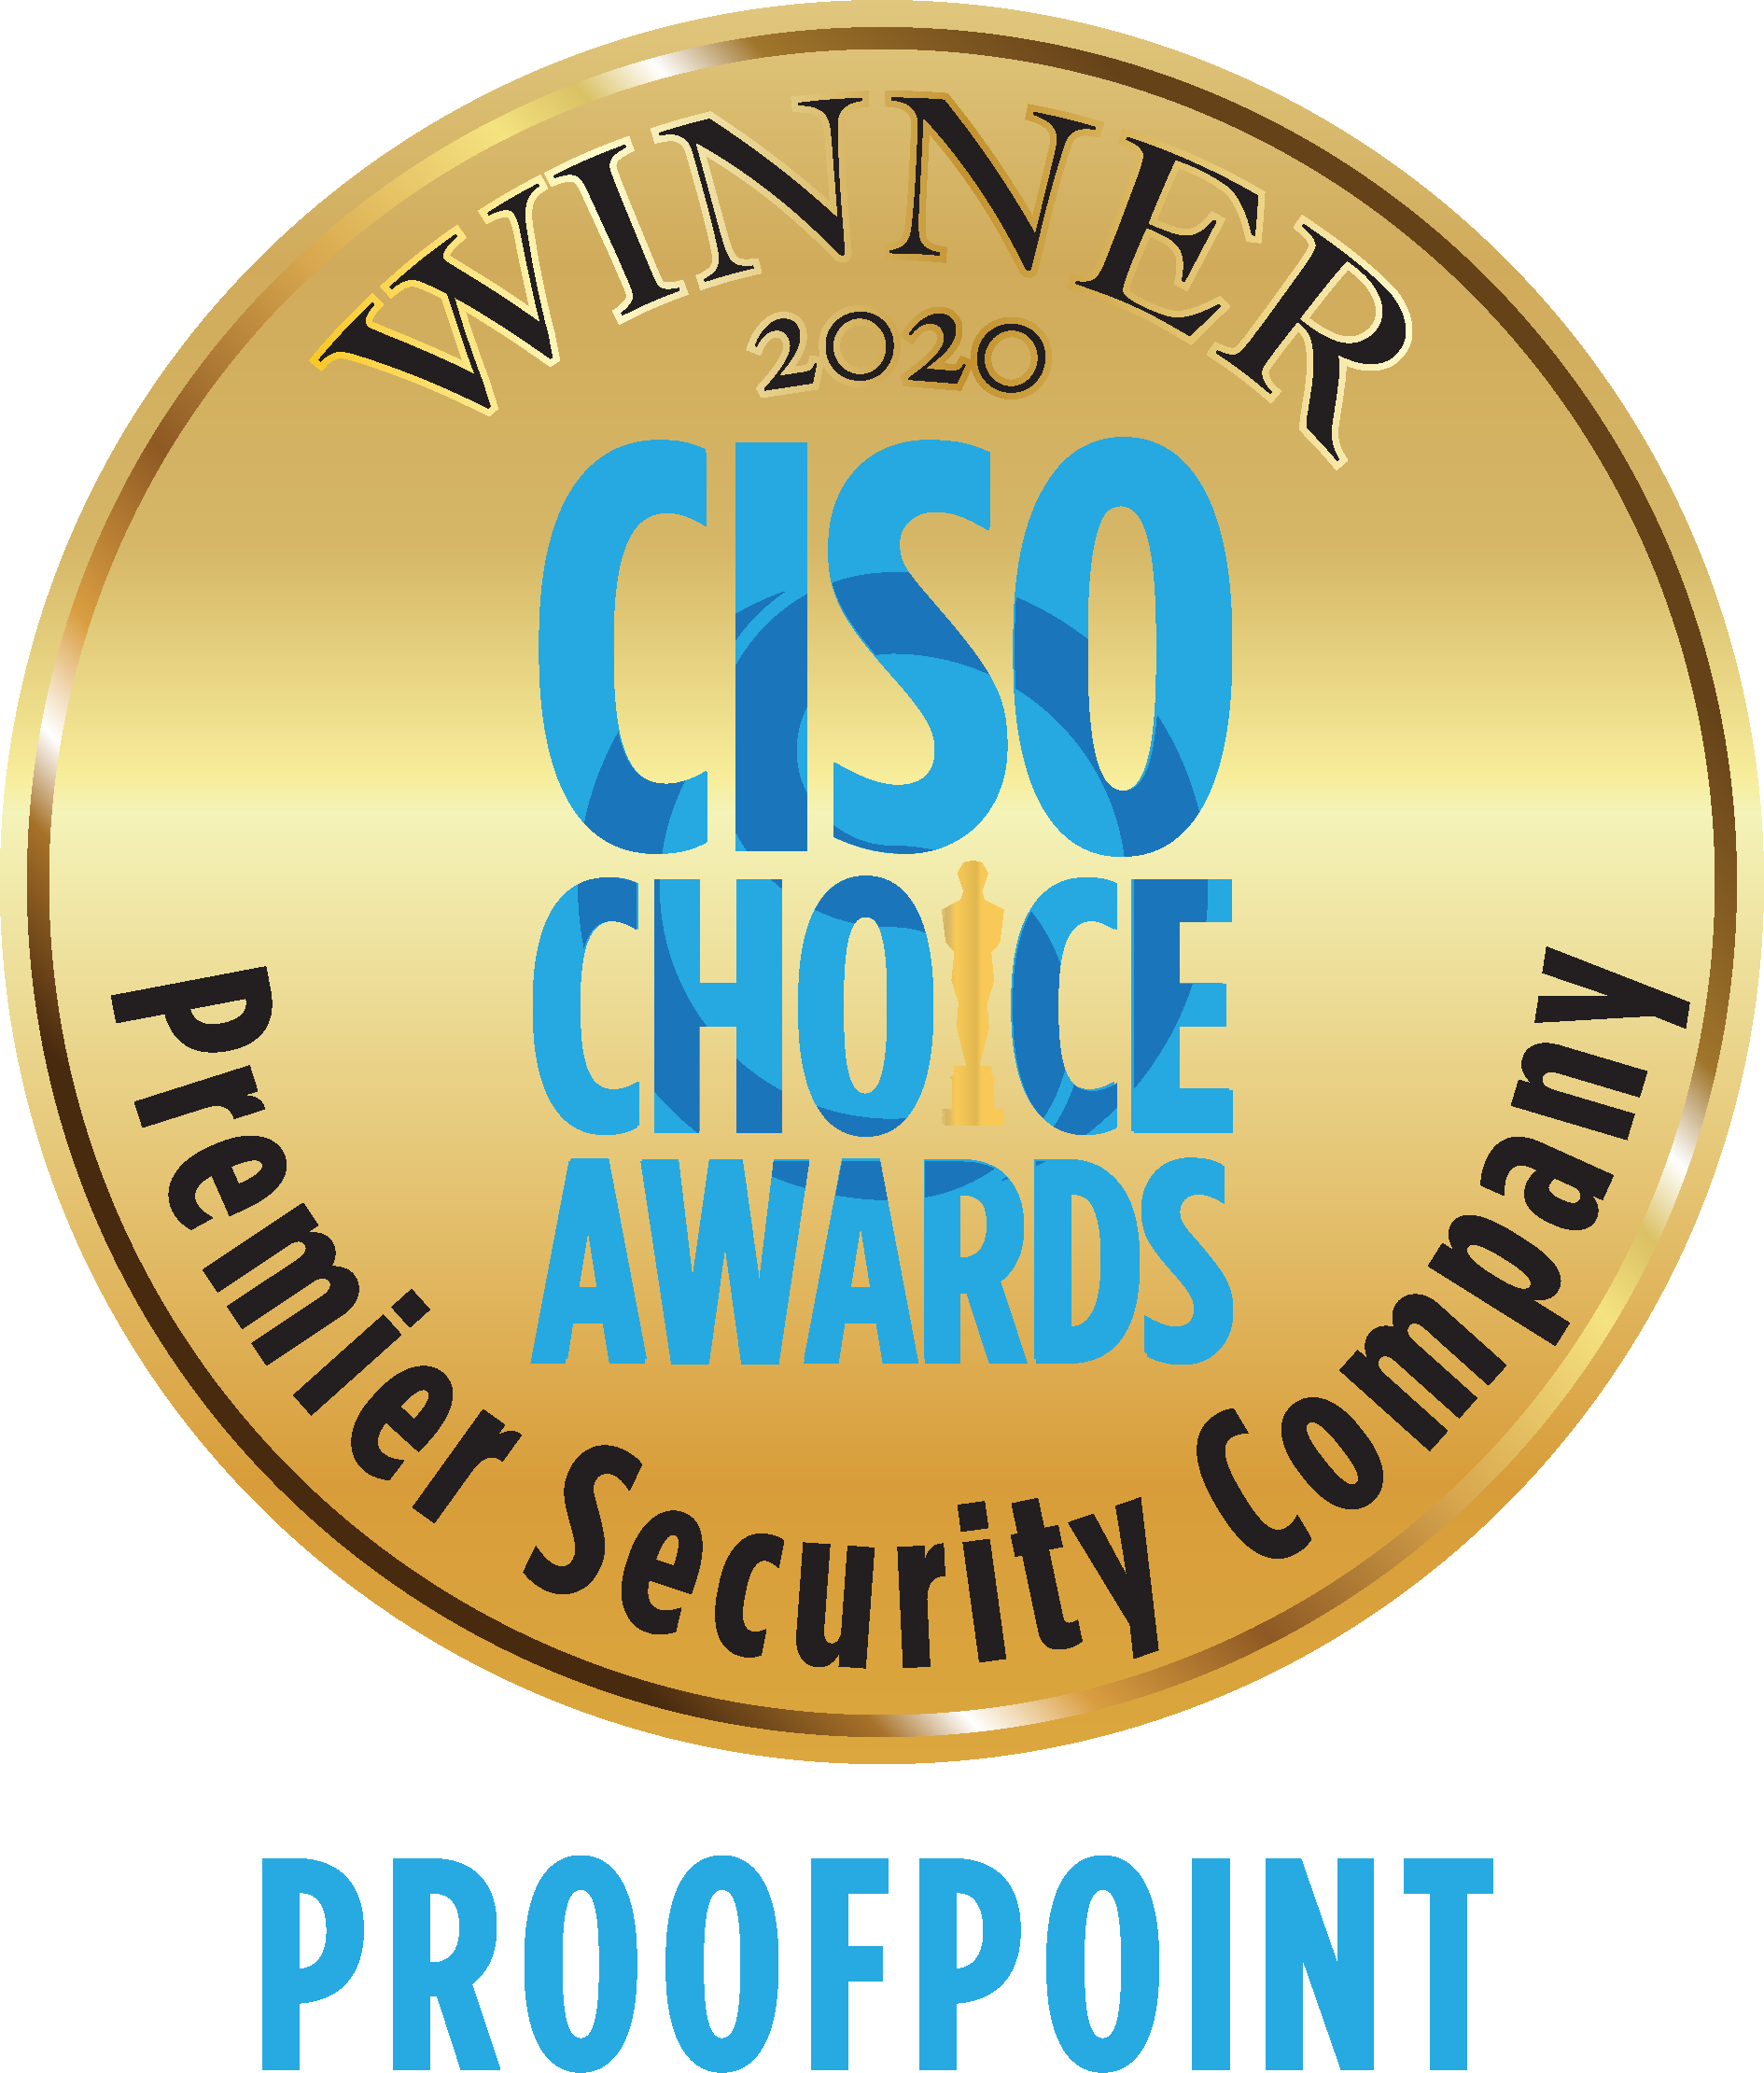 CISO Choice Awards Names Proofpoint the Premier Security Company